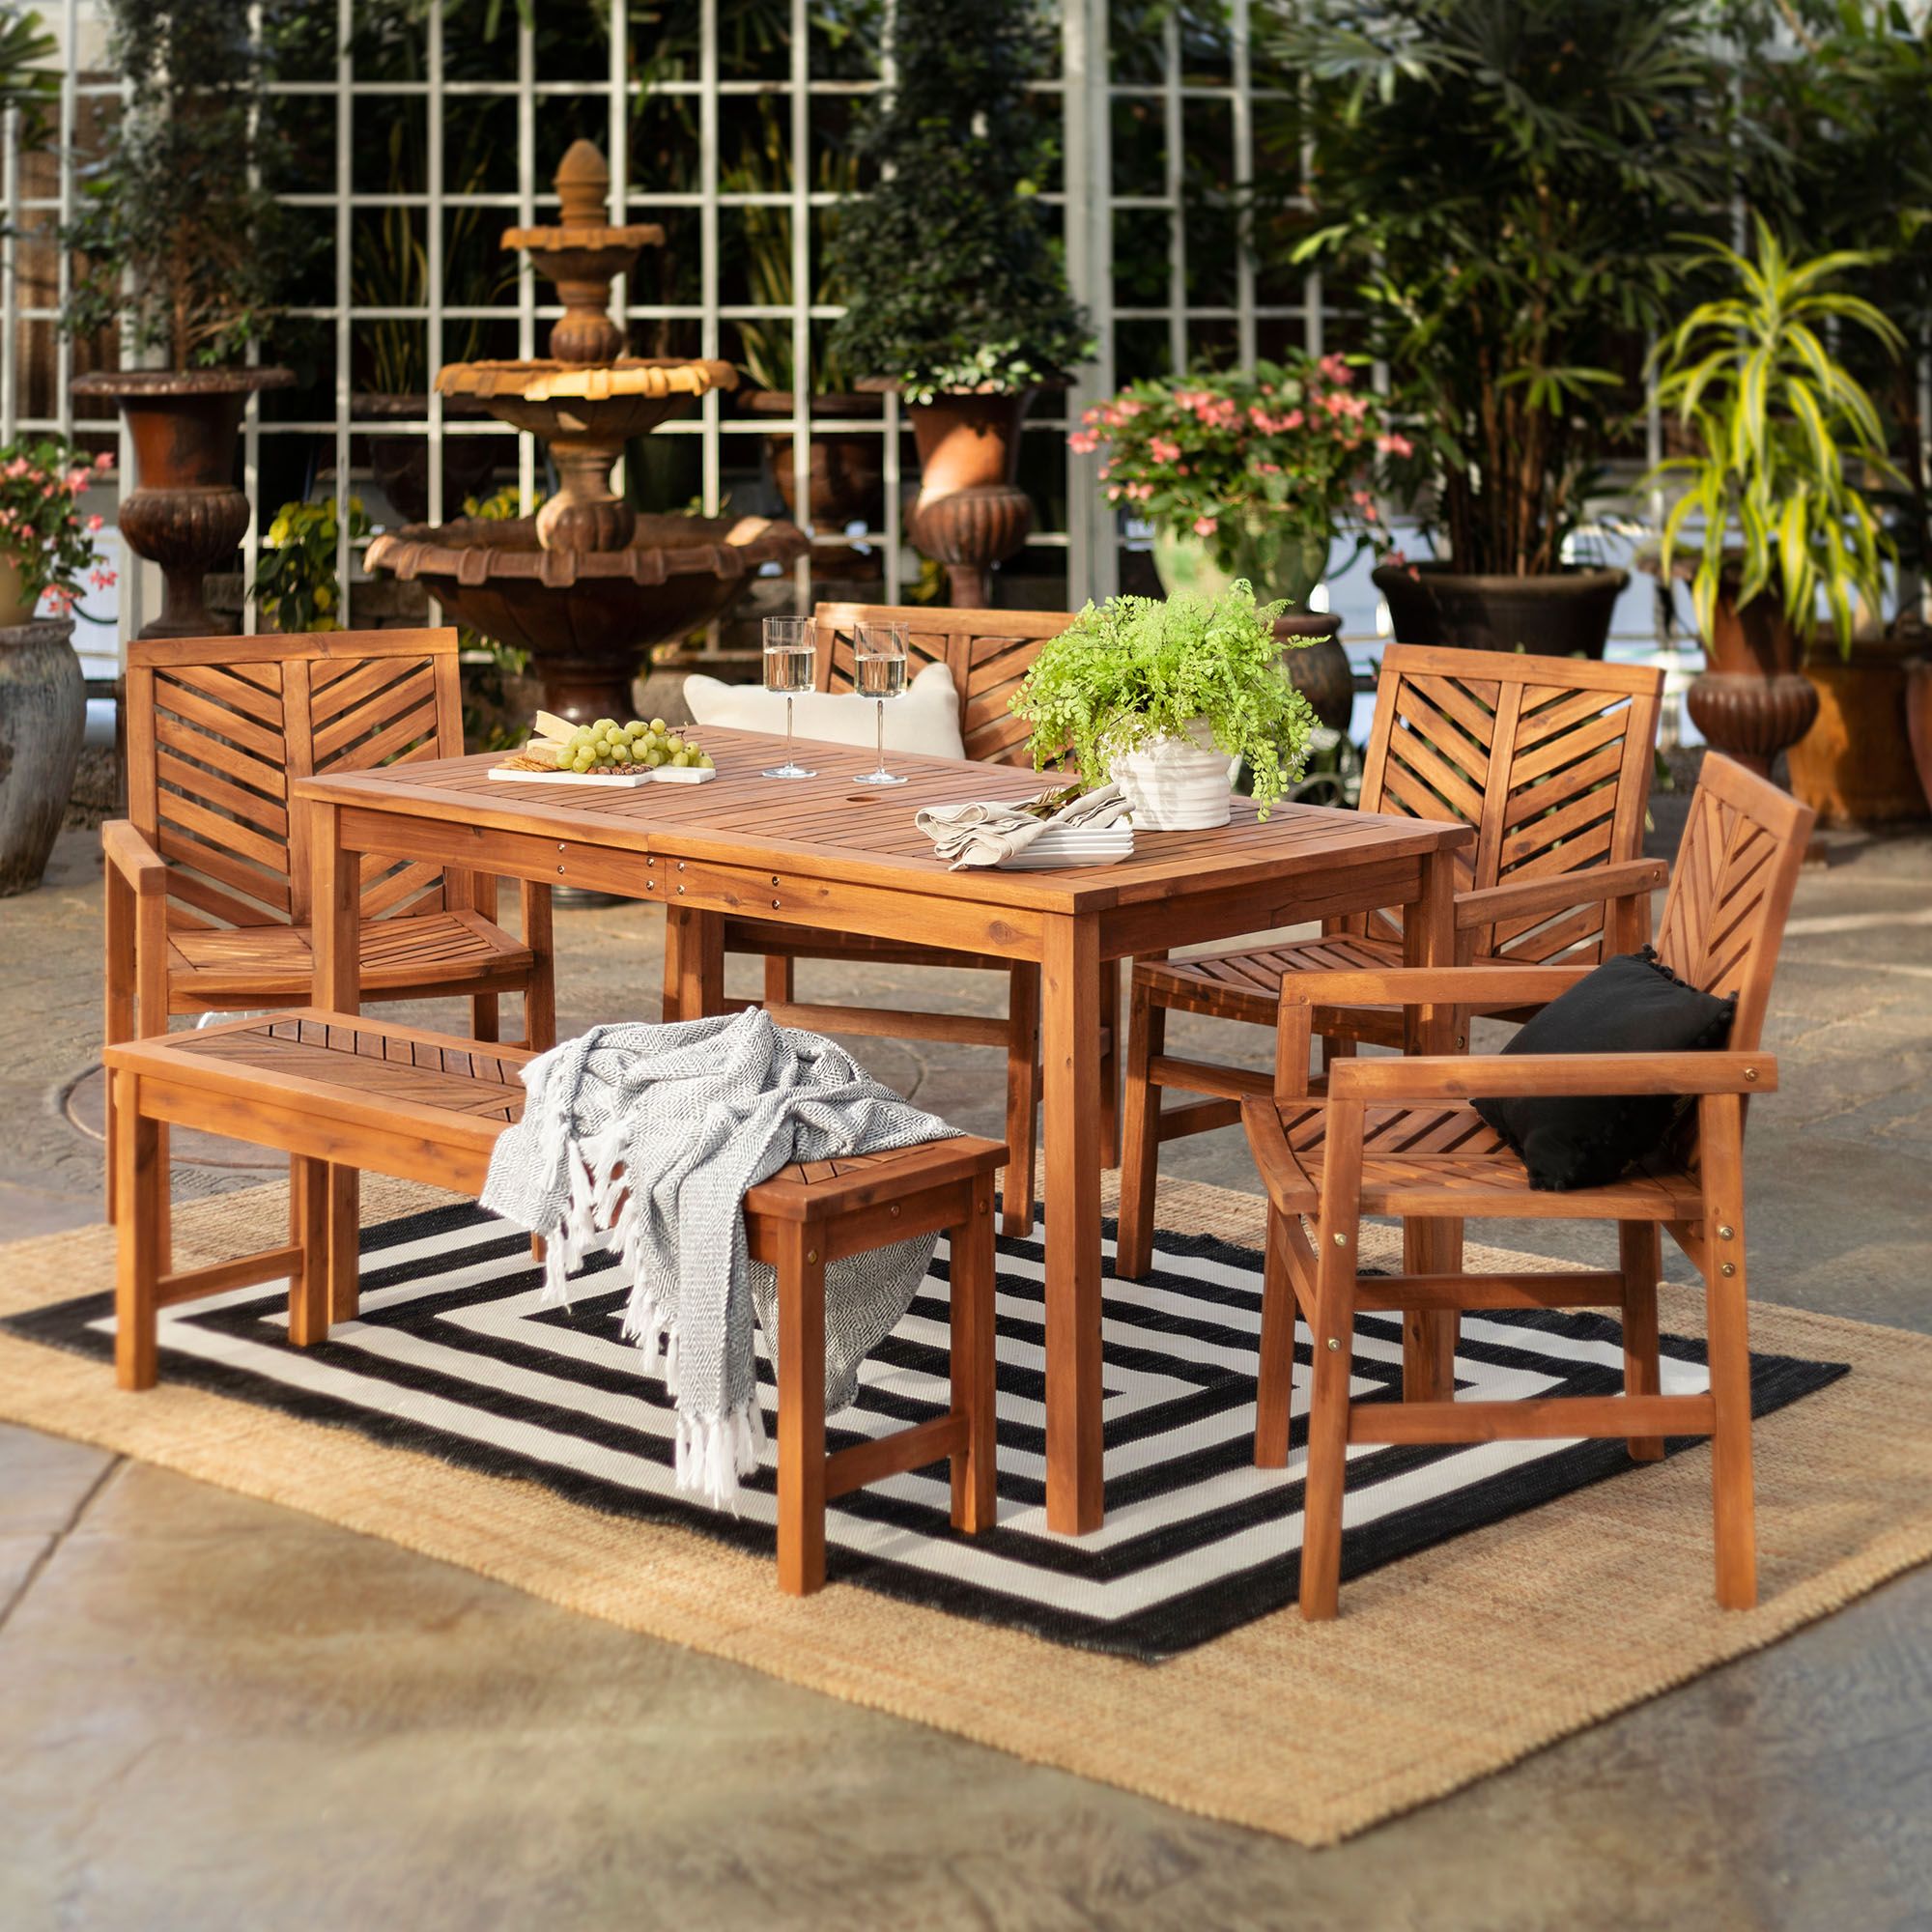 W. Trends 6-Pc. Patio Acacia Dining Set - Brown